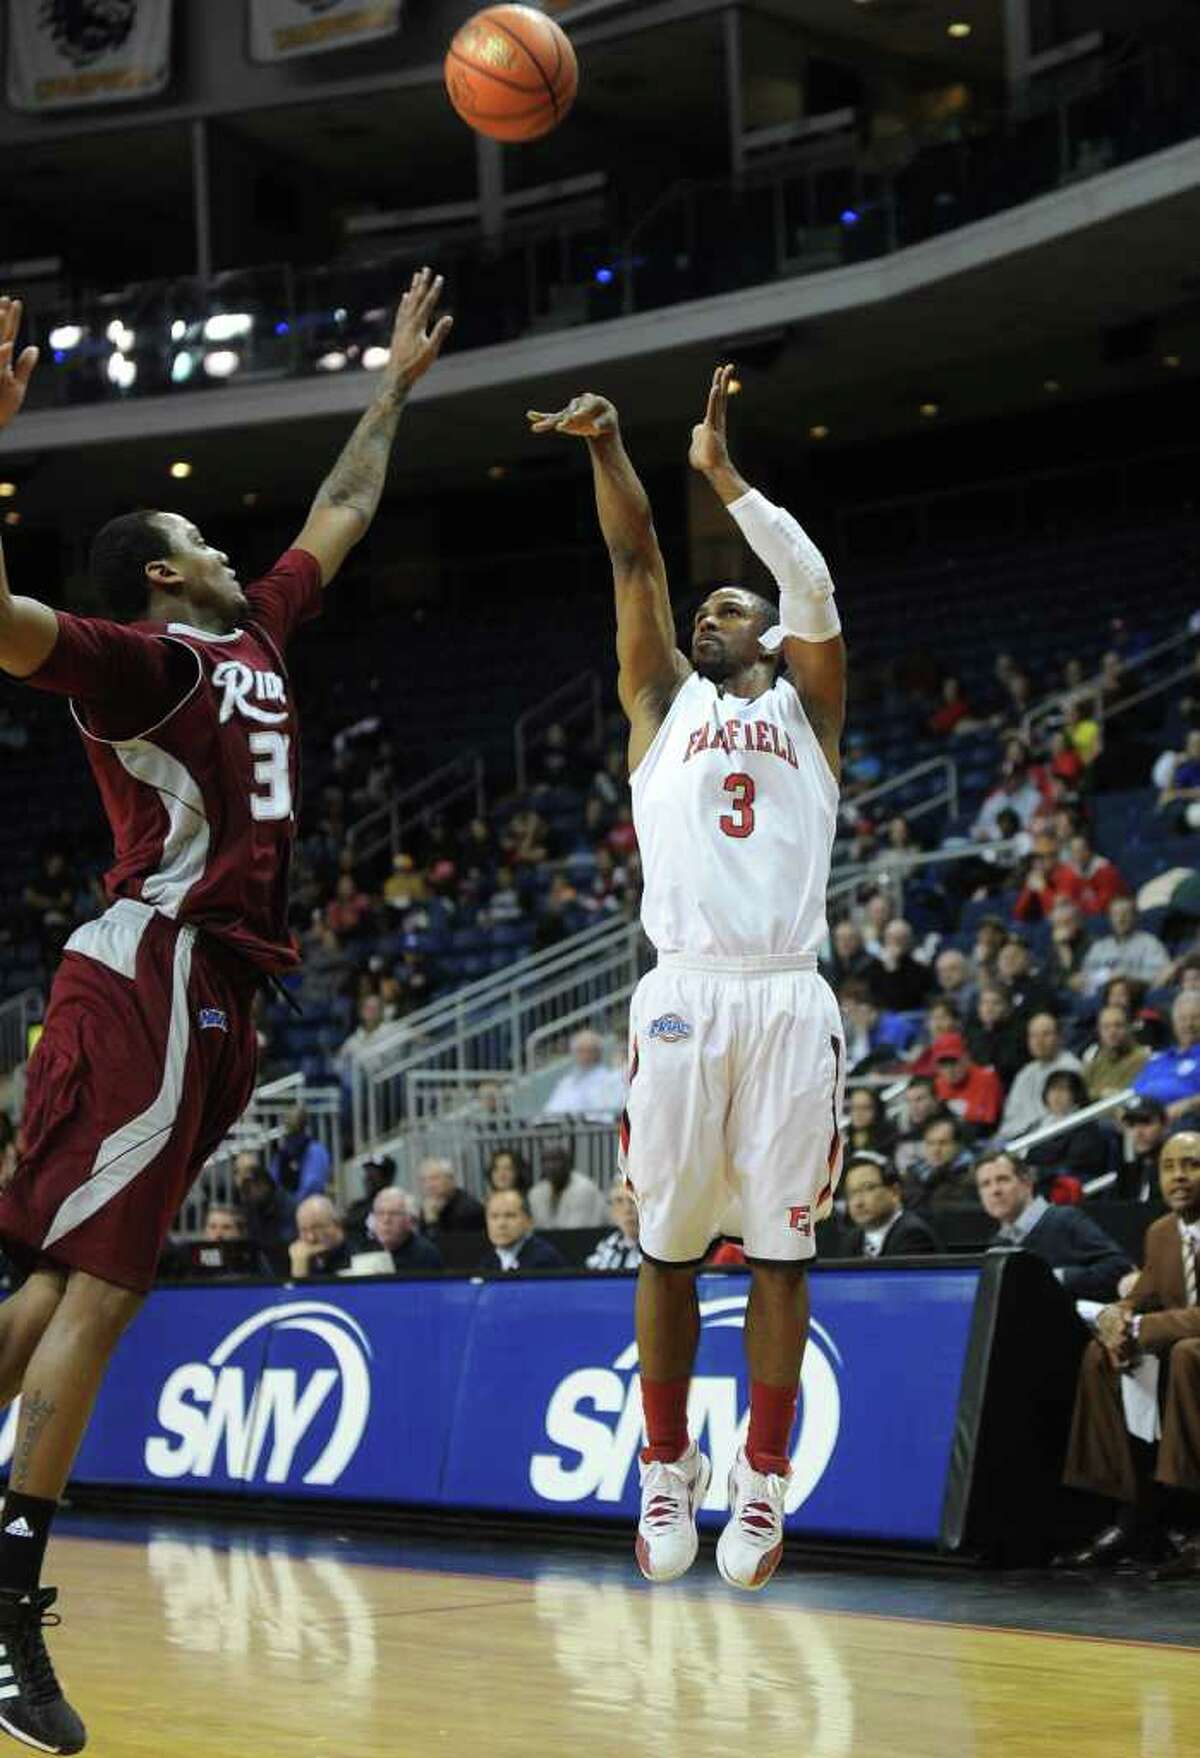 Fairfield's Derek Needham fires a jump shot during the Stags' MAAC matchup with Rider at the Webster Bank Arena in Bridgeport on Monday, January 16, 2012.